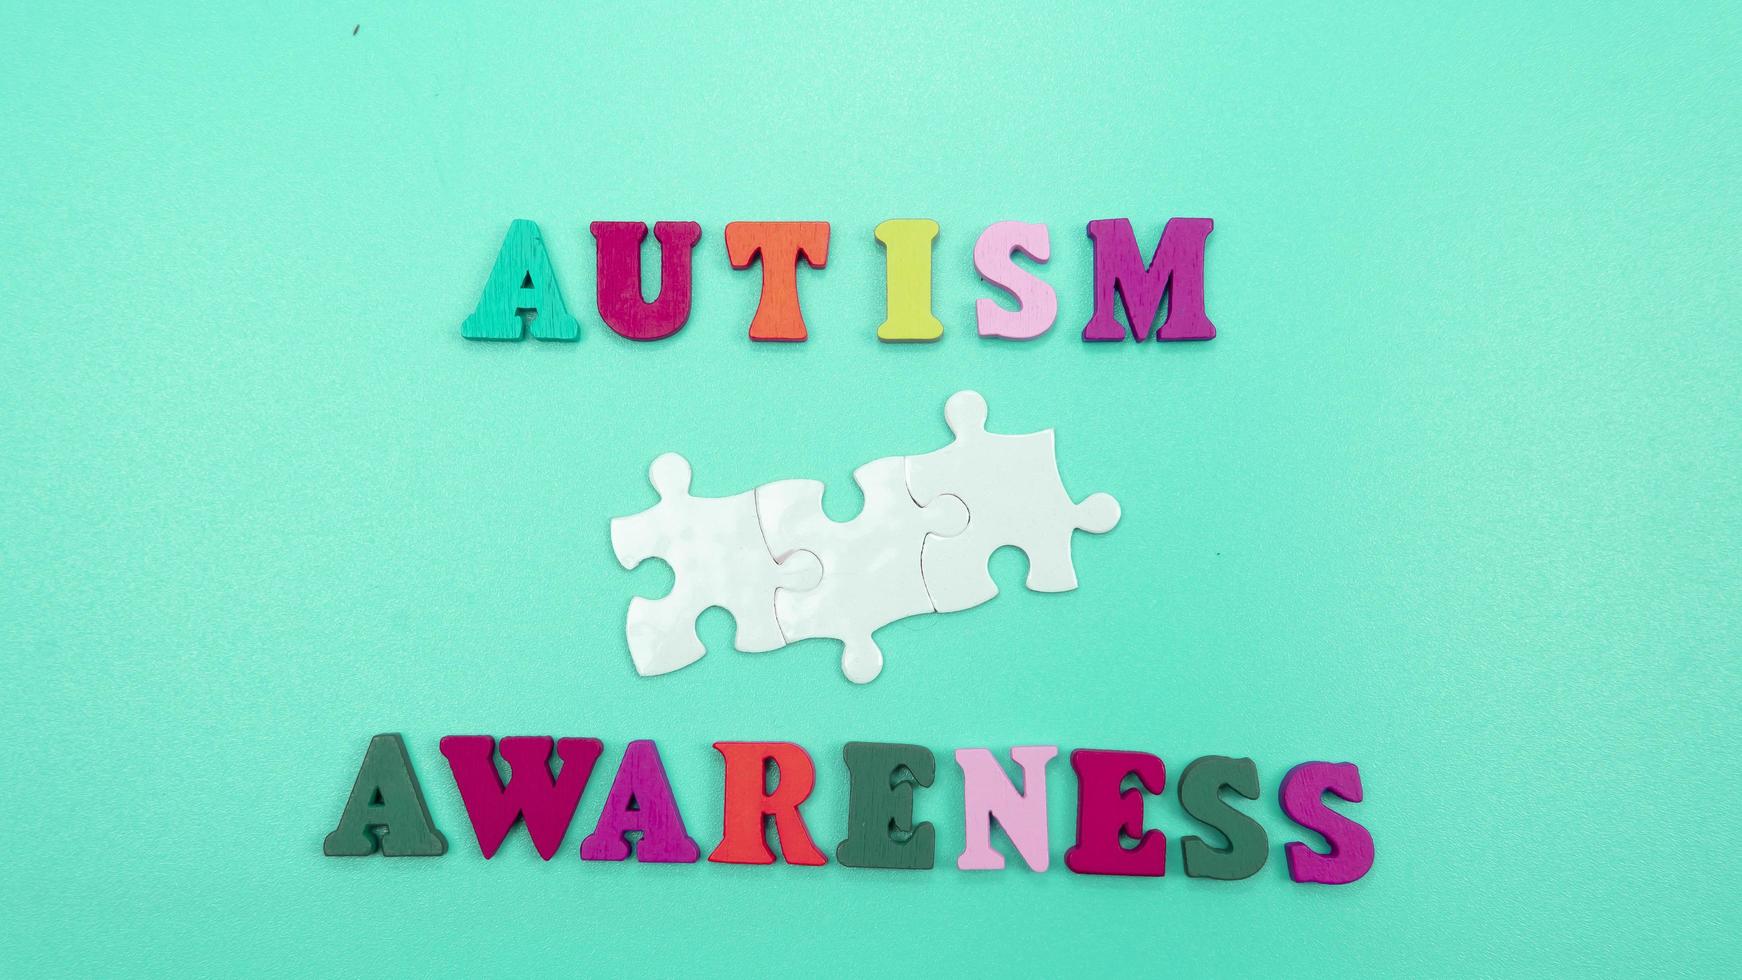 Autism Awareness for people photo